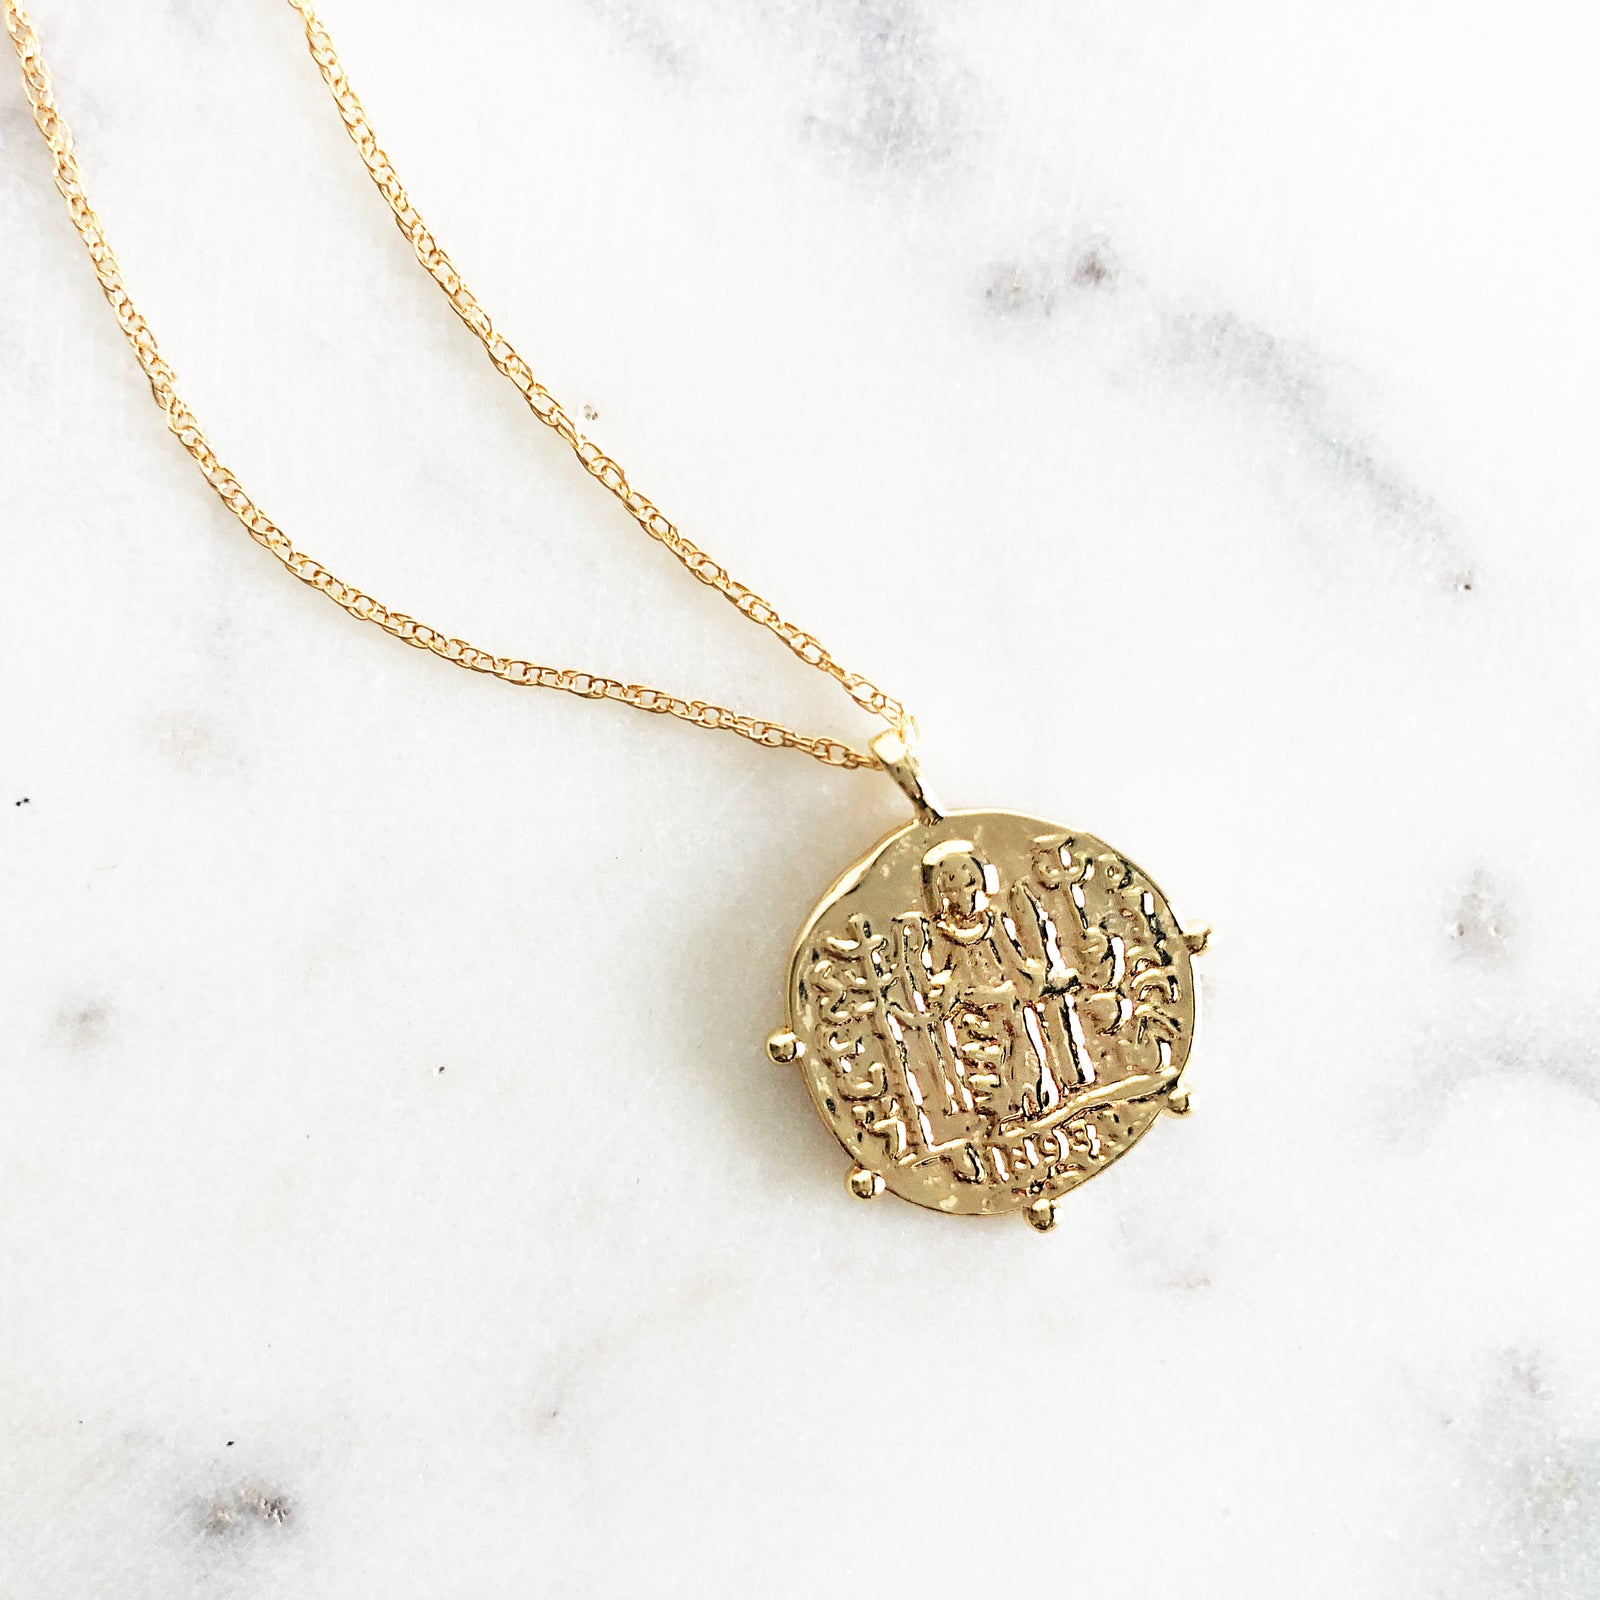 Gold pirate coin necklace